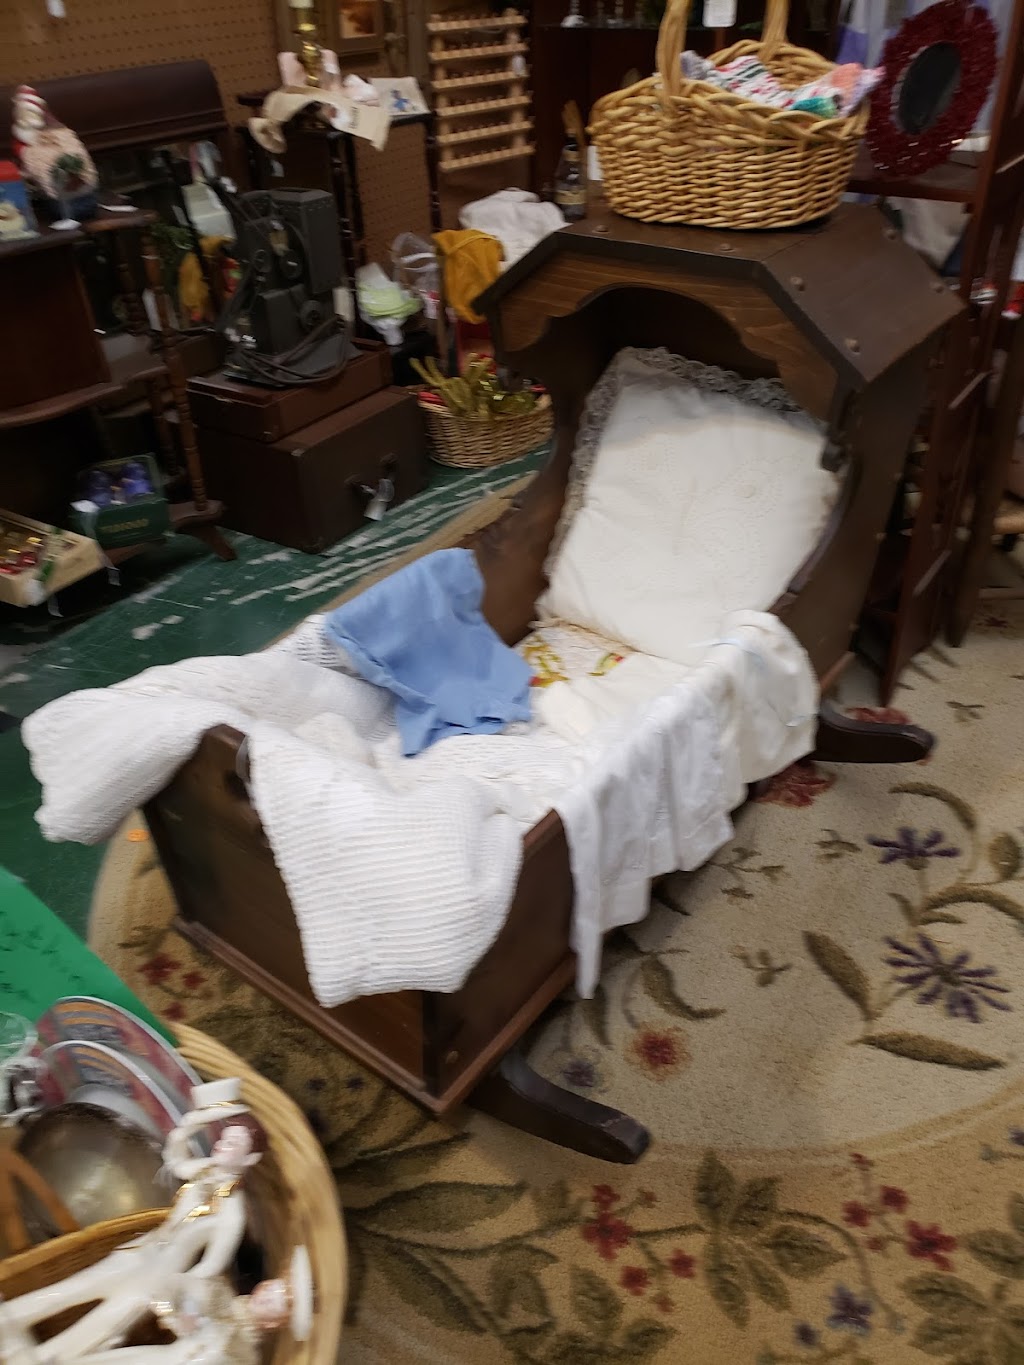 The Classy Cactus Antique Mall | 100 W 3rd St, Justin, TX 76247 | Phone: (940) 648-2747